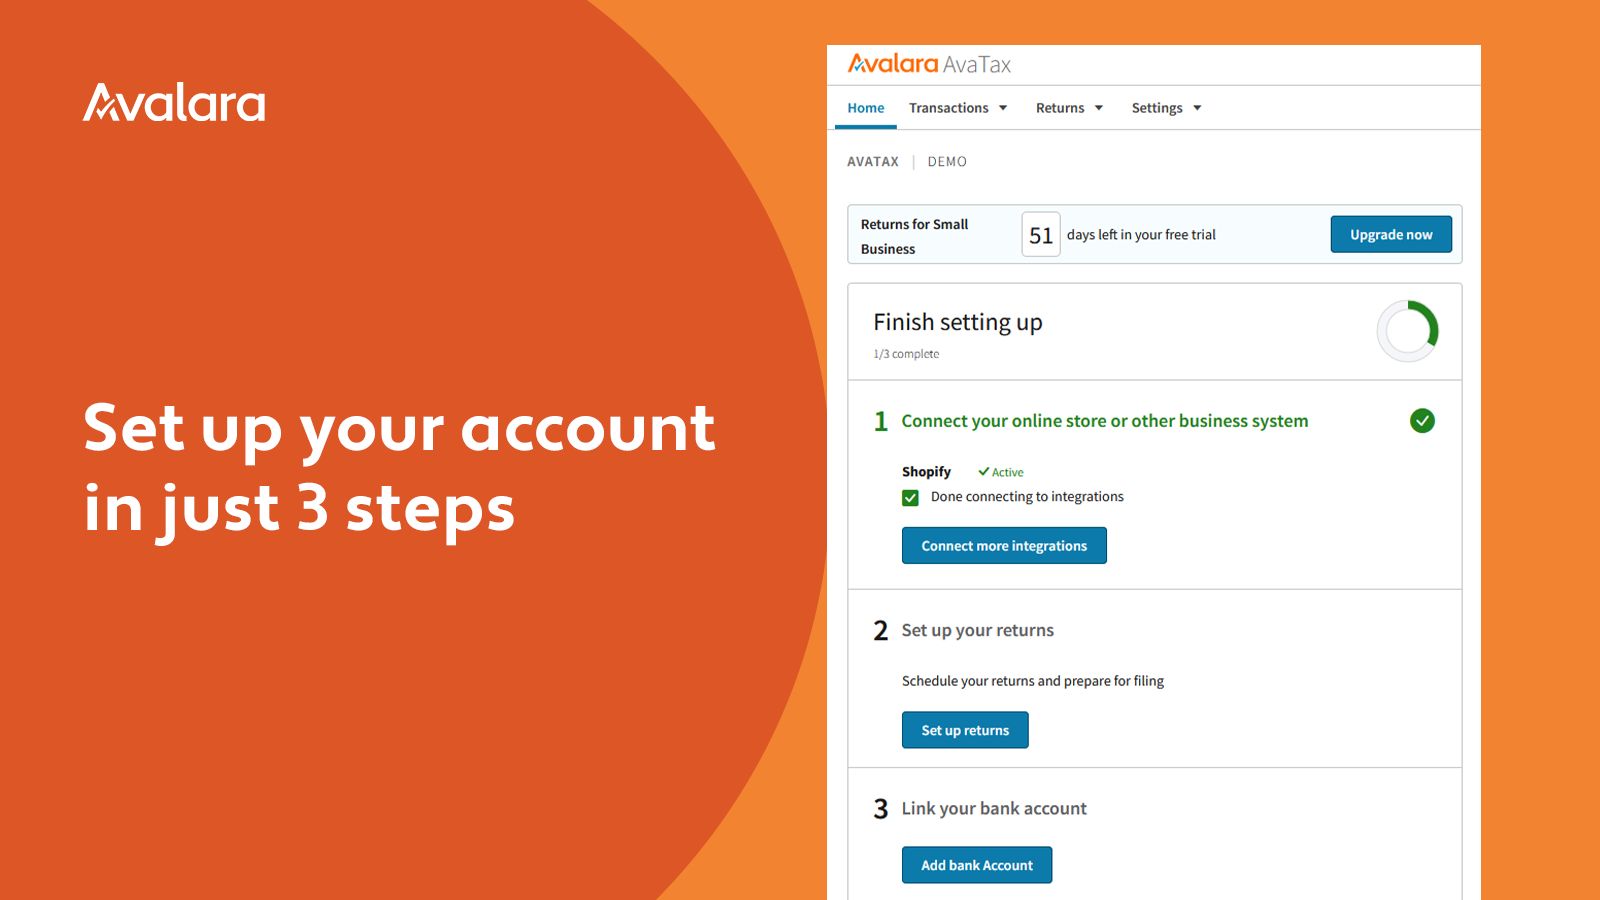 Set up your account in just 3 steps